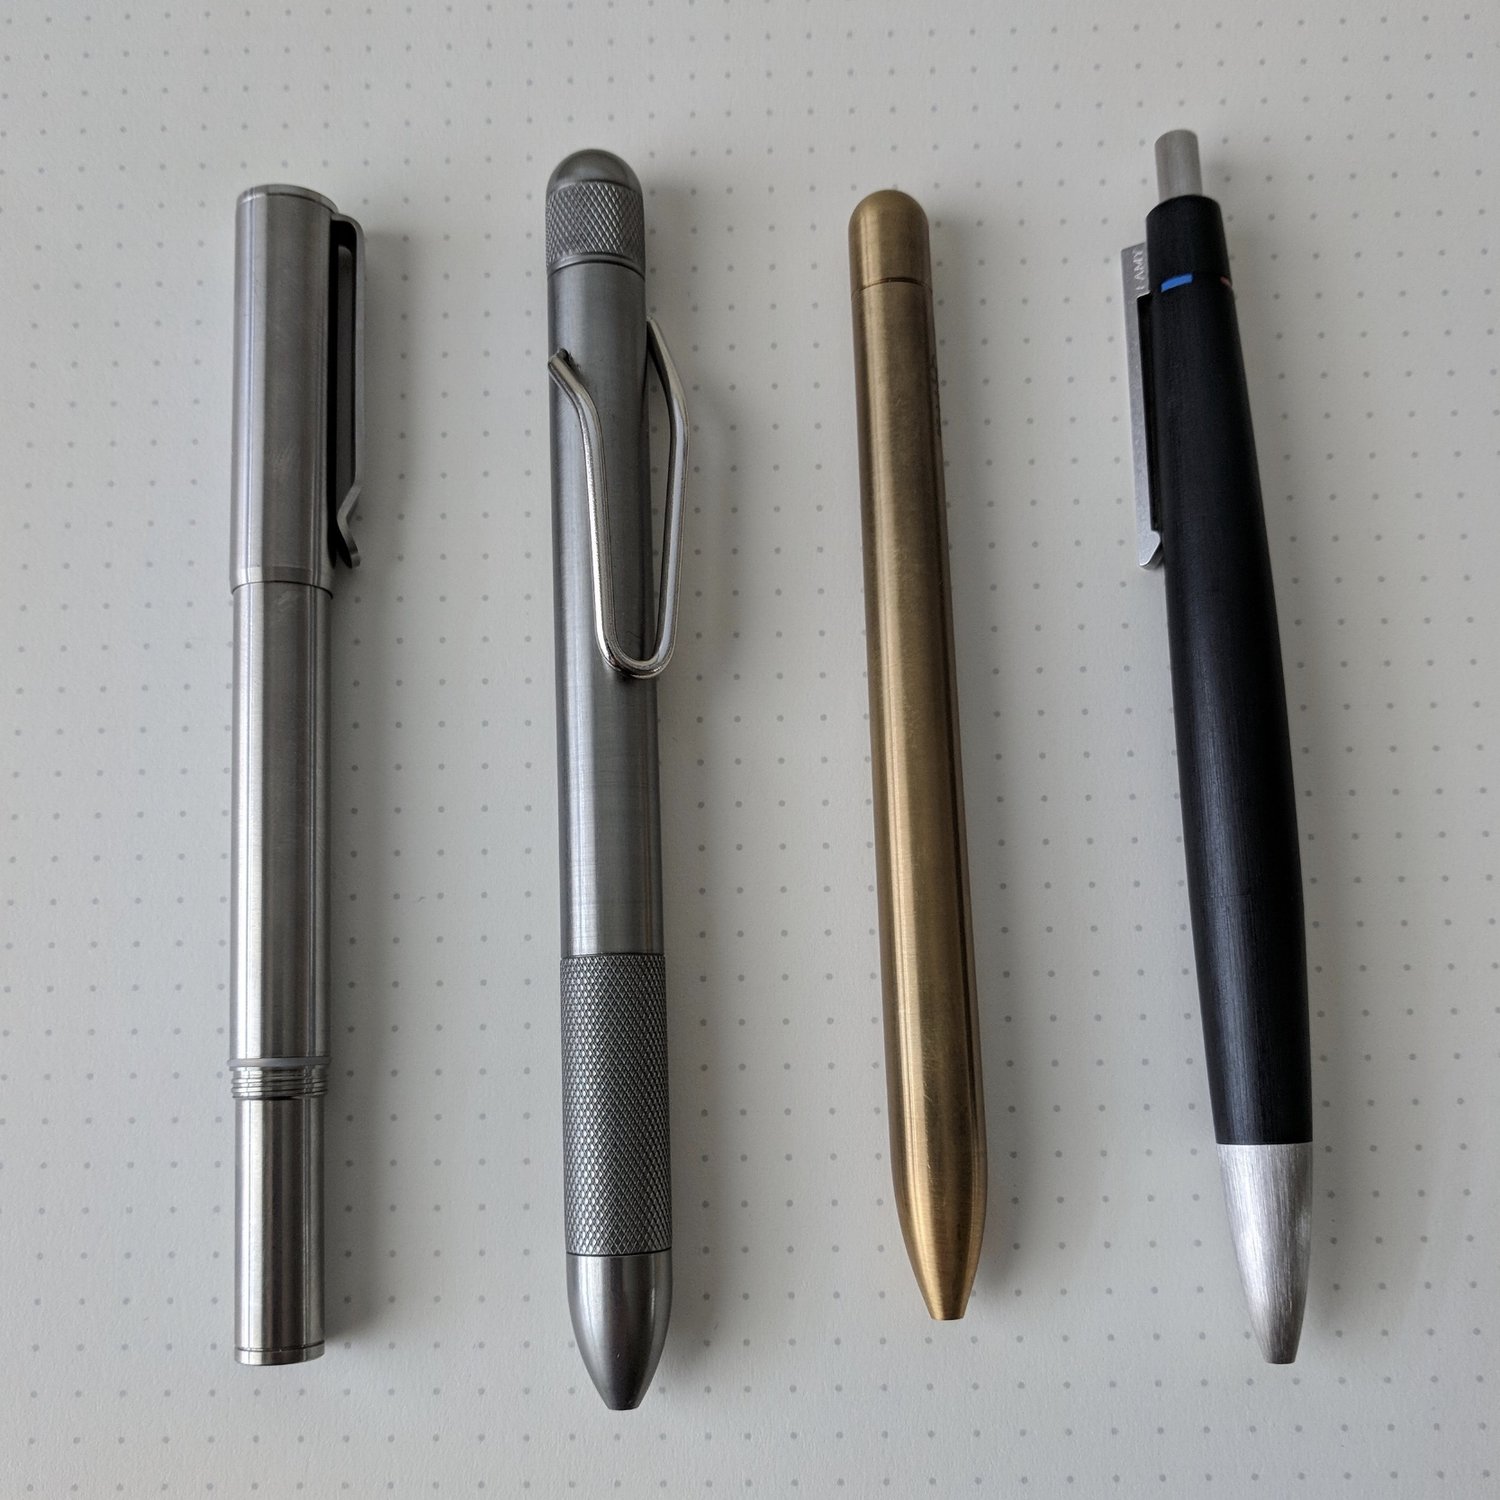 The Best Rollerball Pens